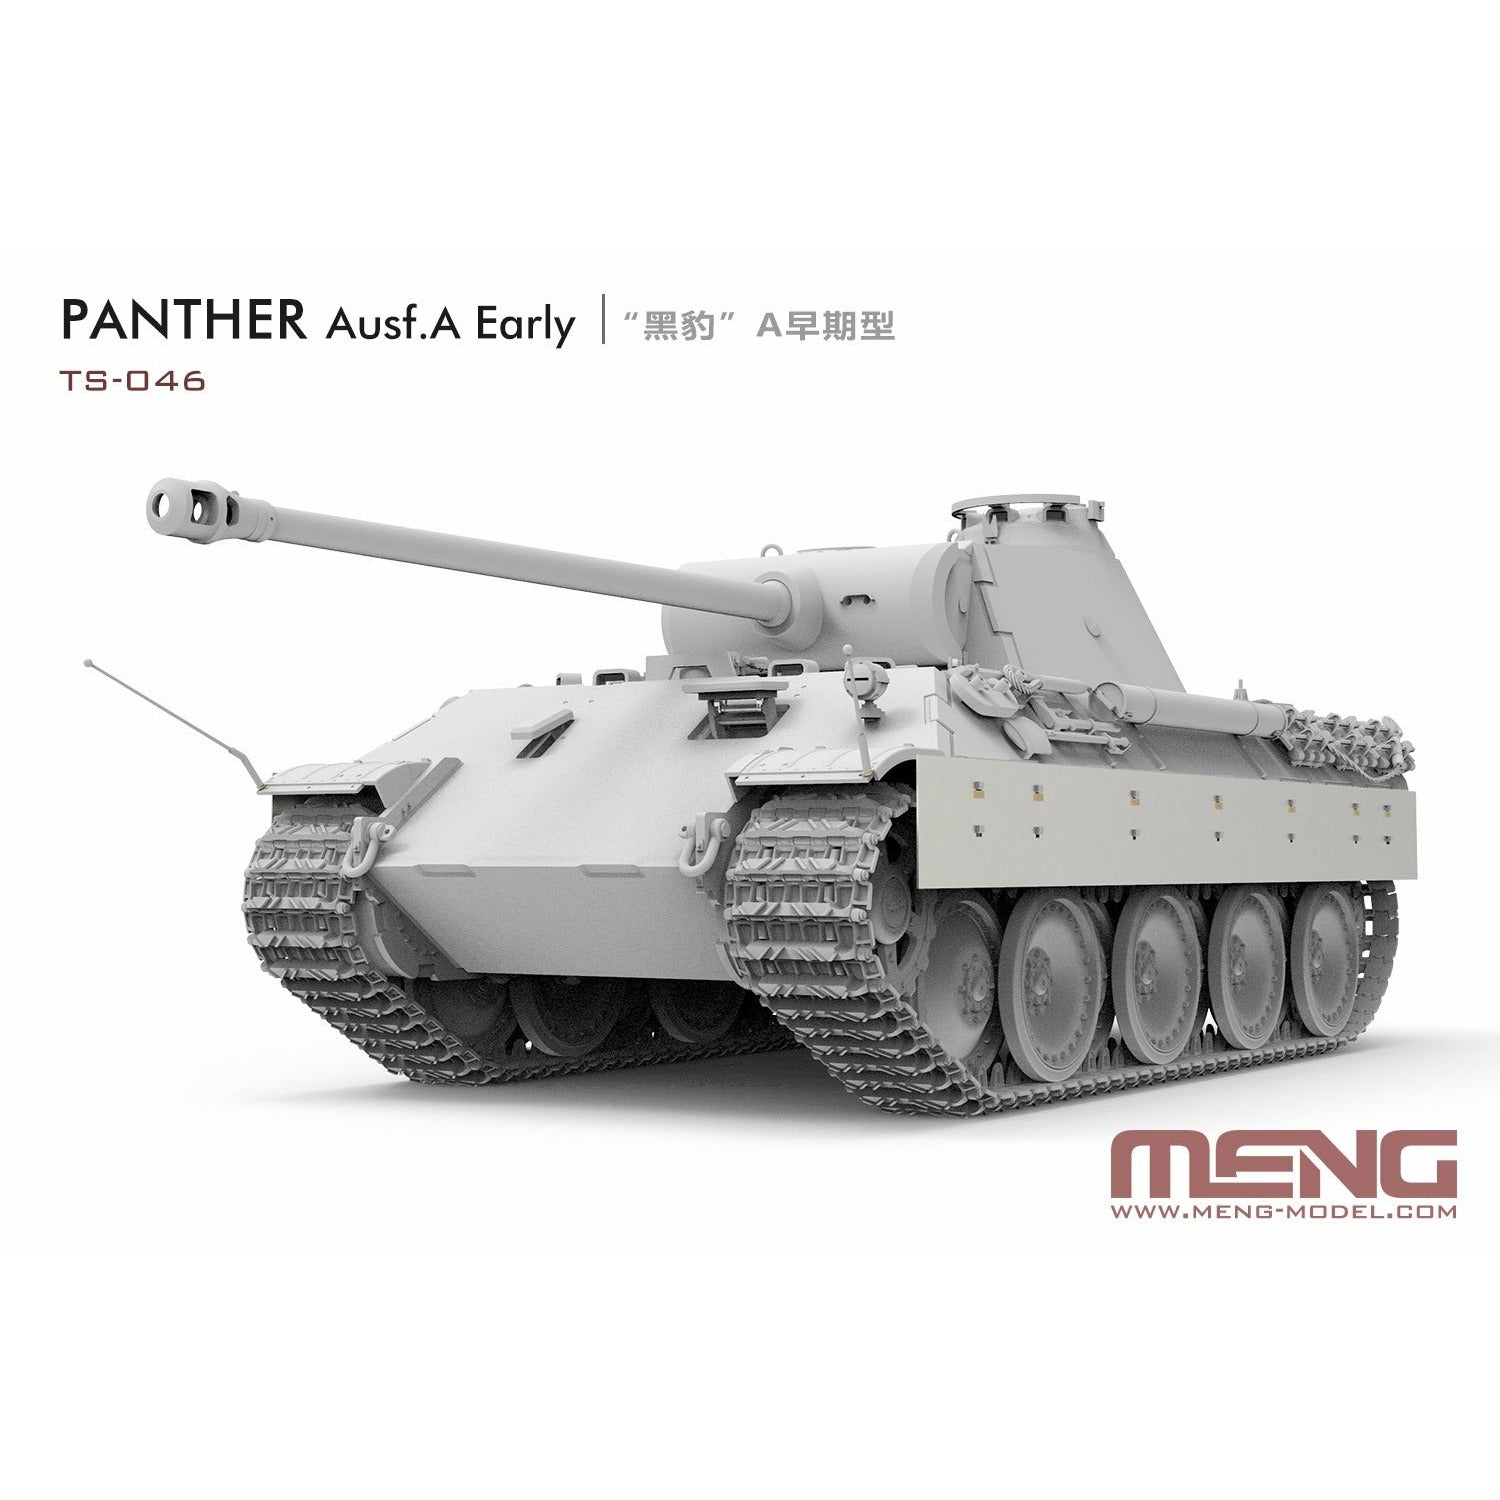 German Medium Tank Sd.Kfz.171 Panther Ausf.A Early 1/35 #TS-046 by Meng